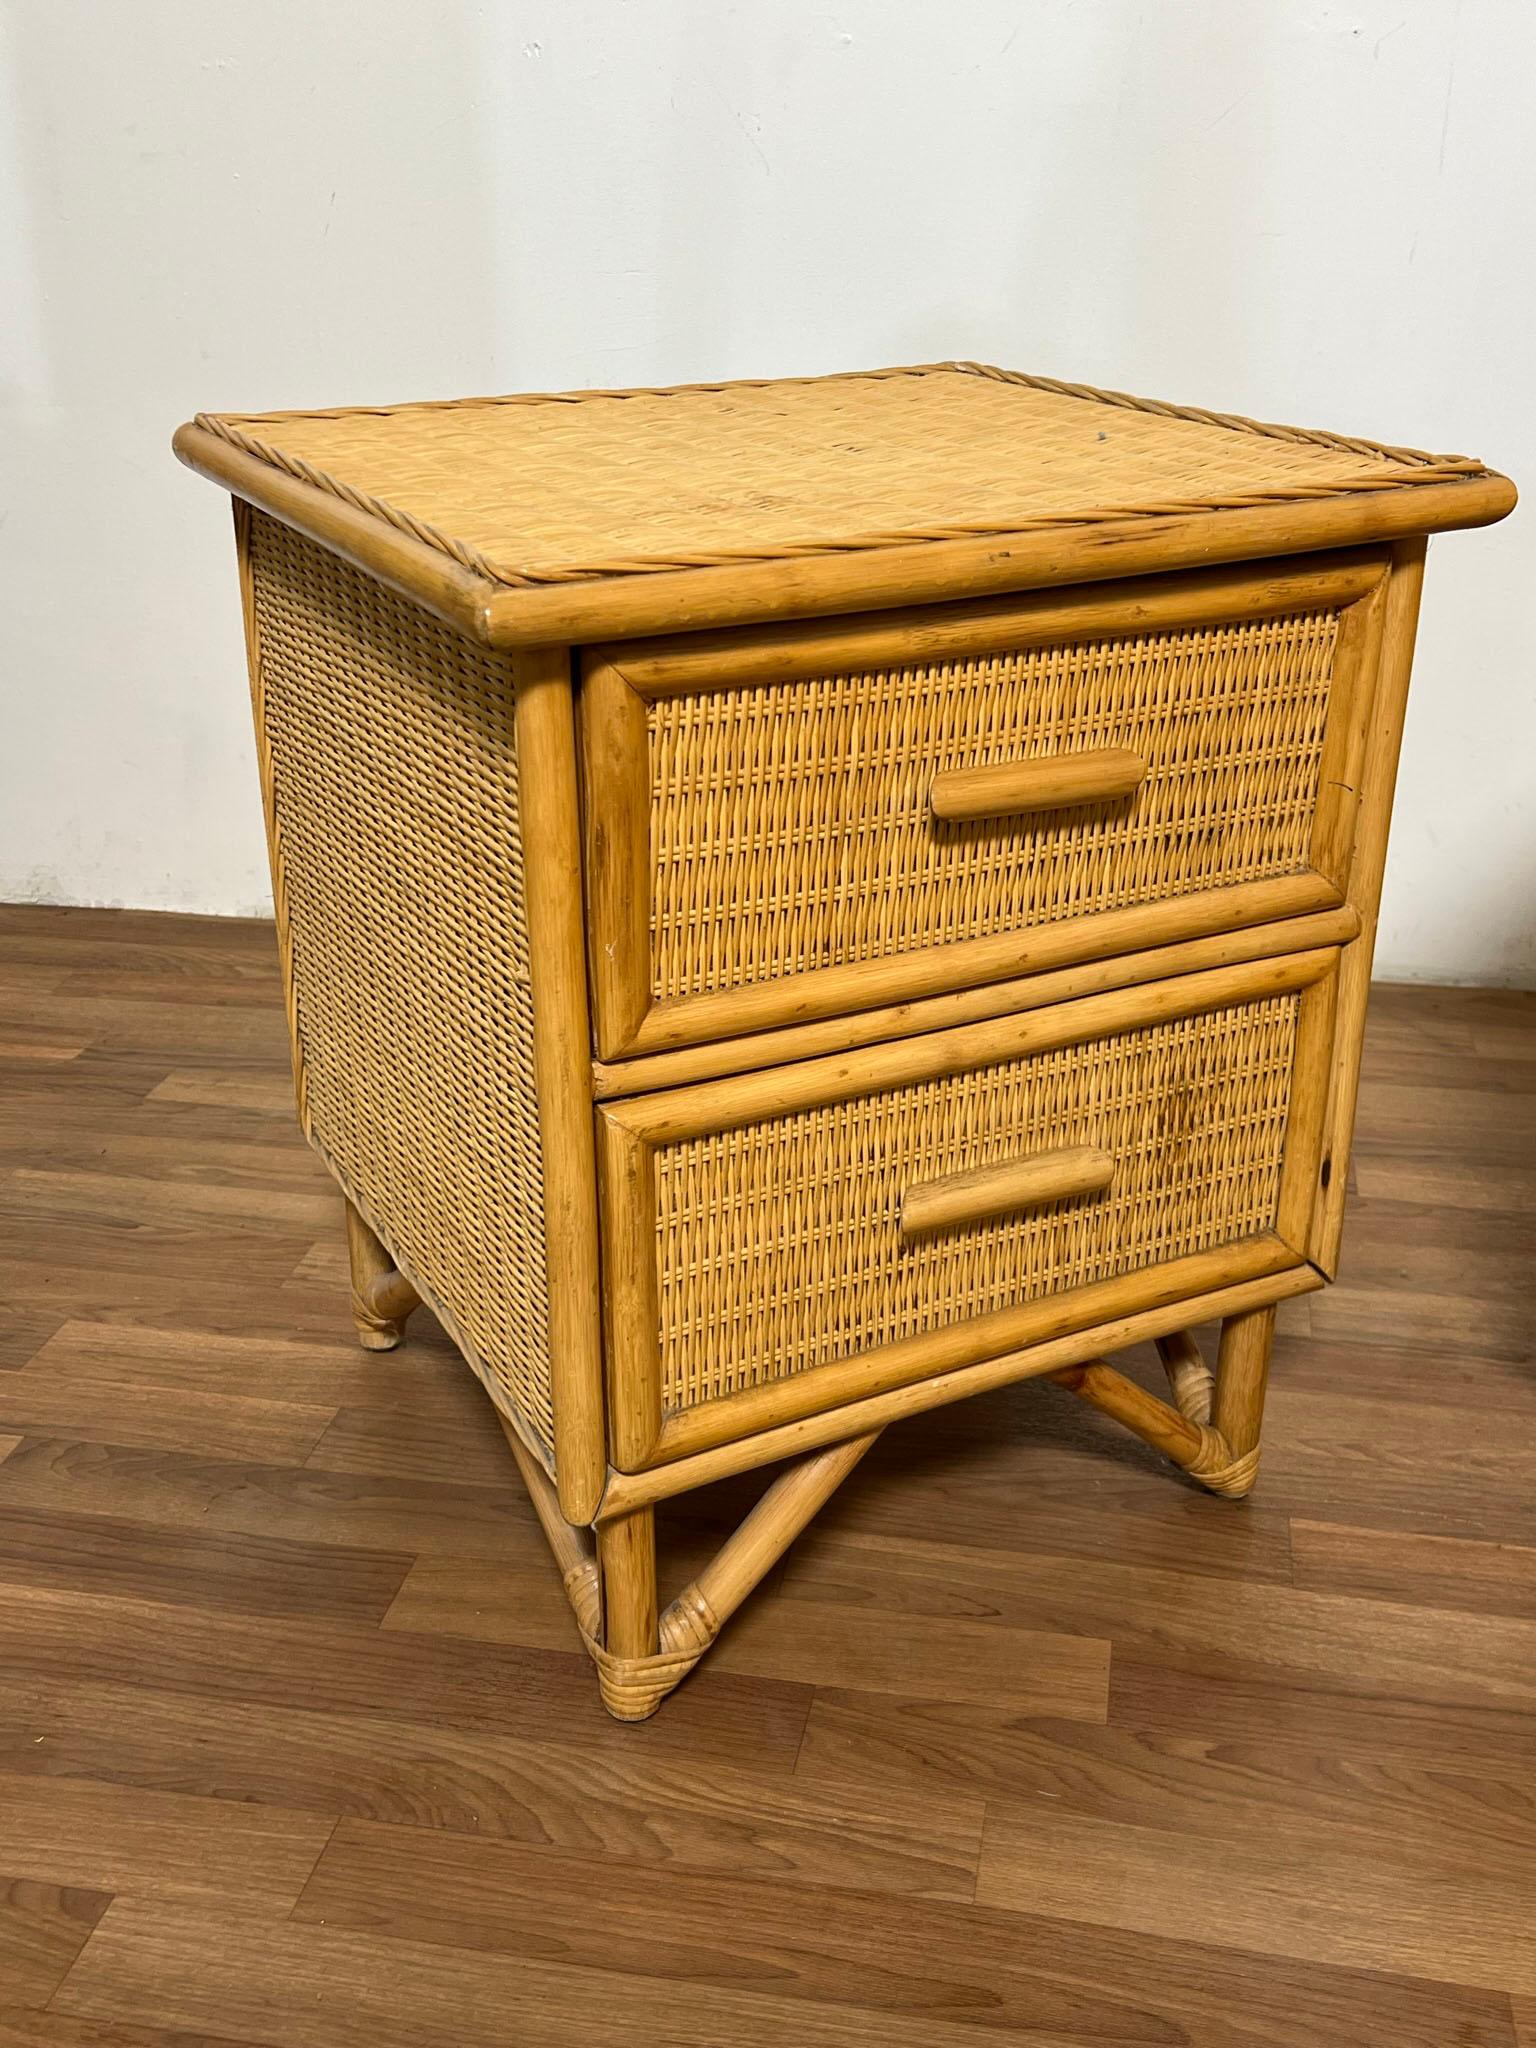 Pair of rattan and bamboo nightstands with cane wrapped accents, circa 1970s.